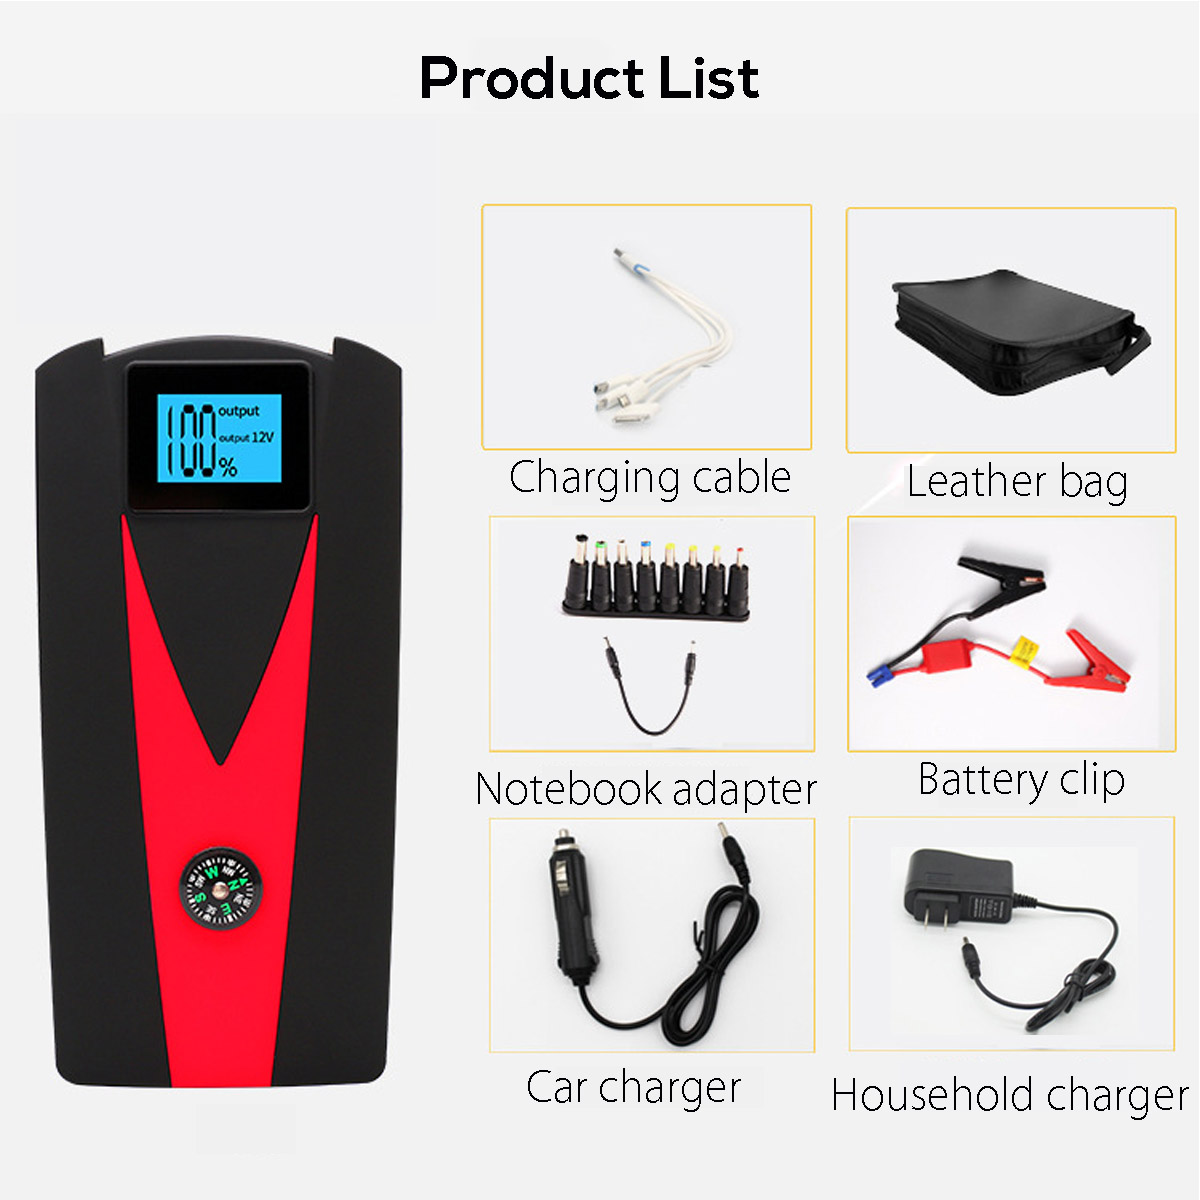 99900-mAh-Dual-USB-Car-Jump-Starter-LCD-Auto-Battery-Booster-Portable-Power-Pack-with-Jumper-Cables-1421905-12